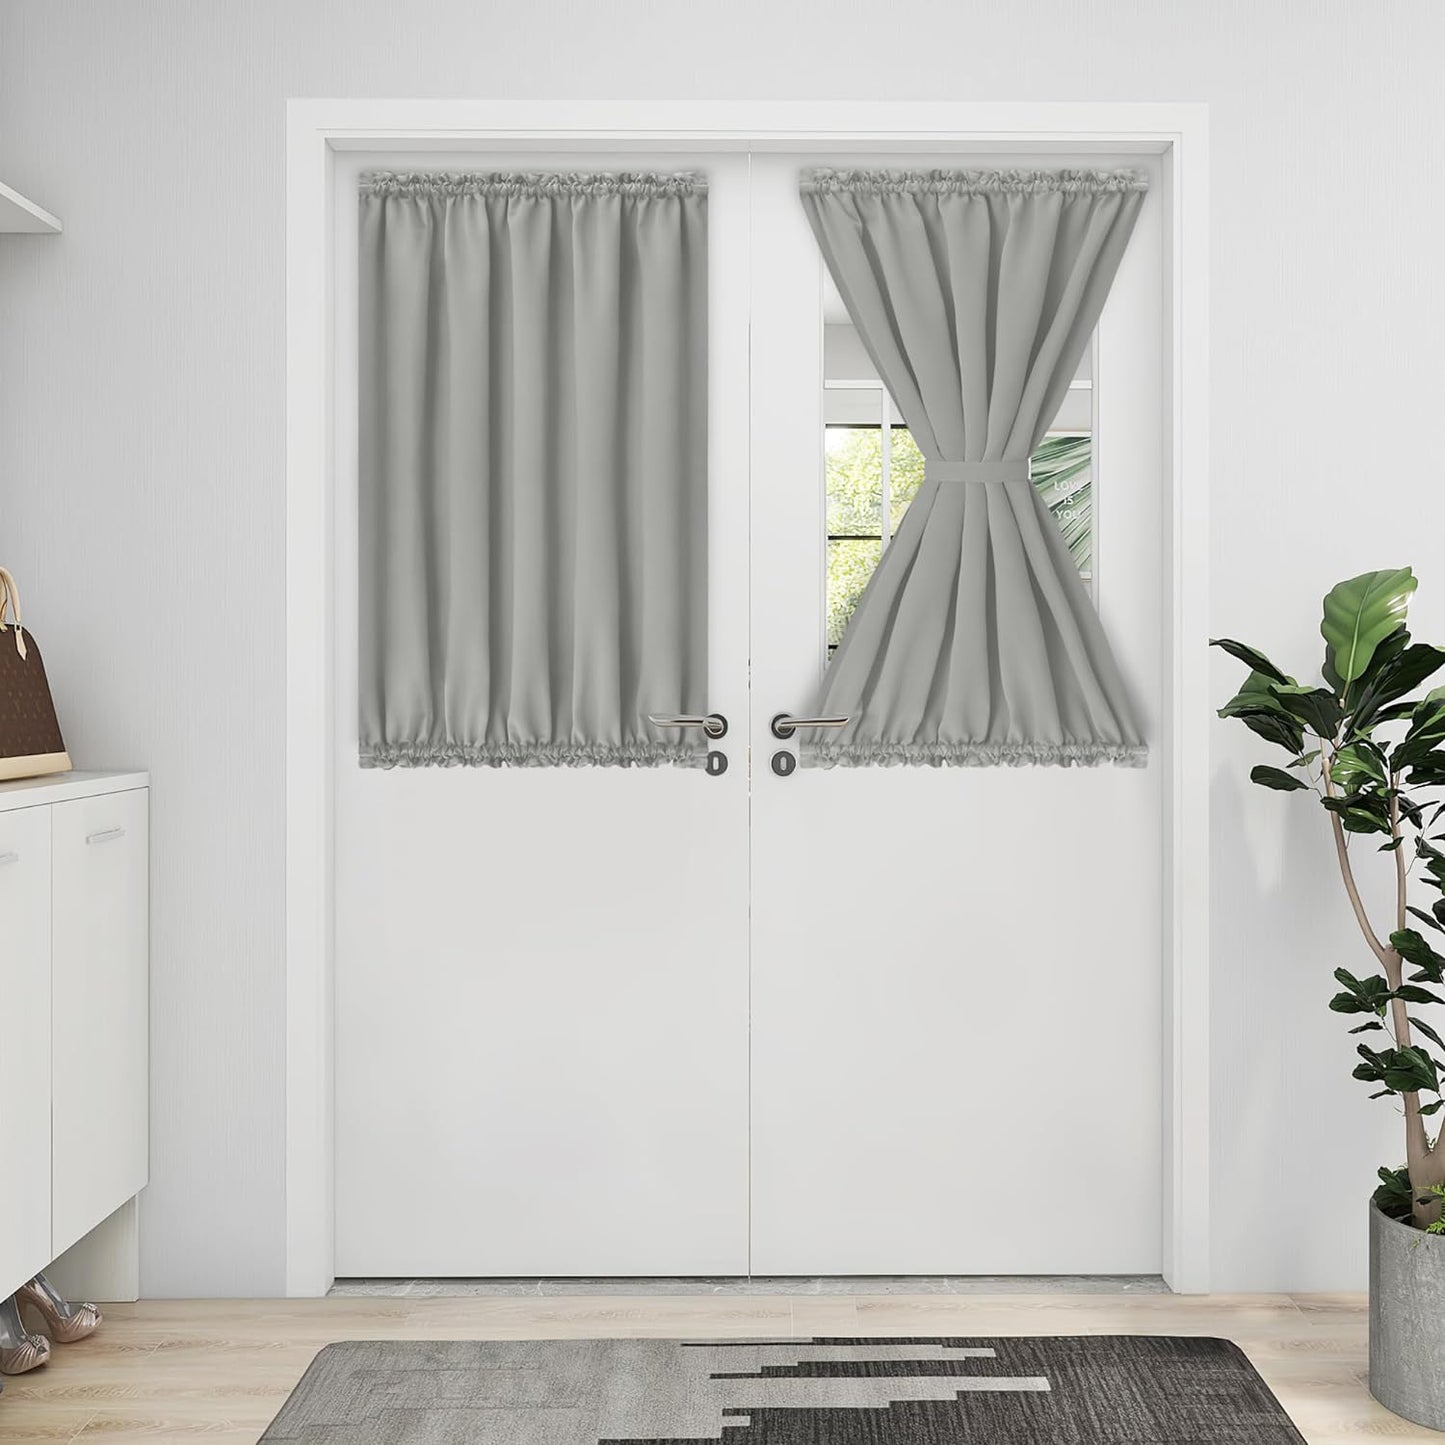 Easy-Going Blackout Door Curtains, Rod Pocket Privacy Light Filtering Sidelight Curtains French Door Curtains with Tieback, 1 Panel, 25X40 Inch, Gray  Easy-Going Light Gray W25 X L40 Inch 